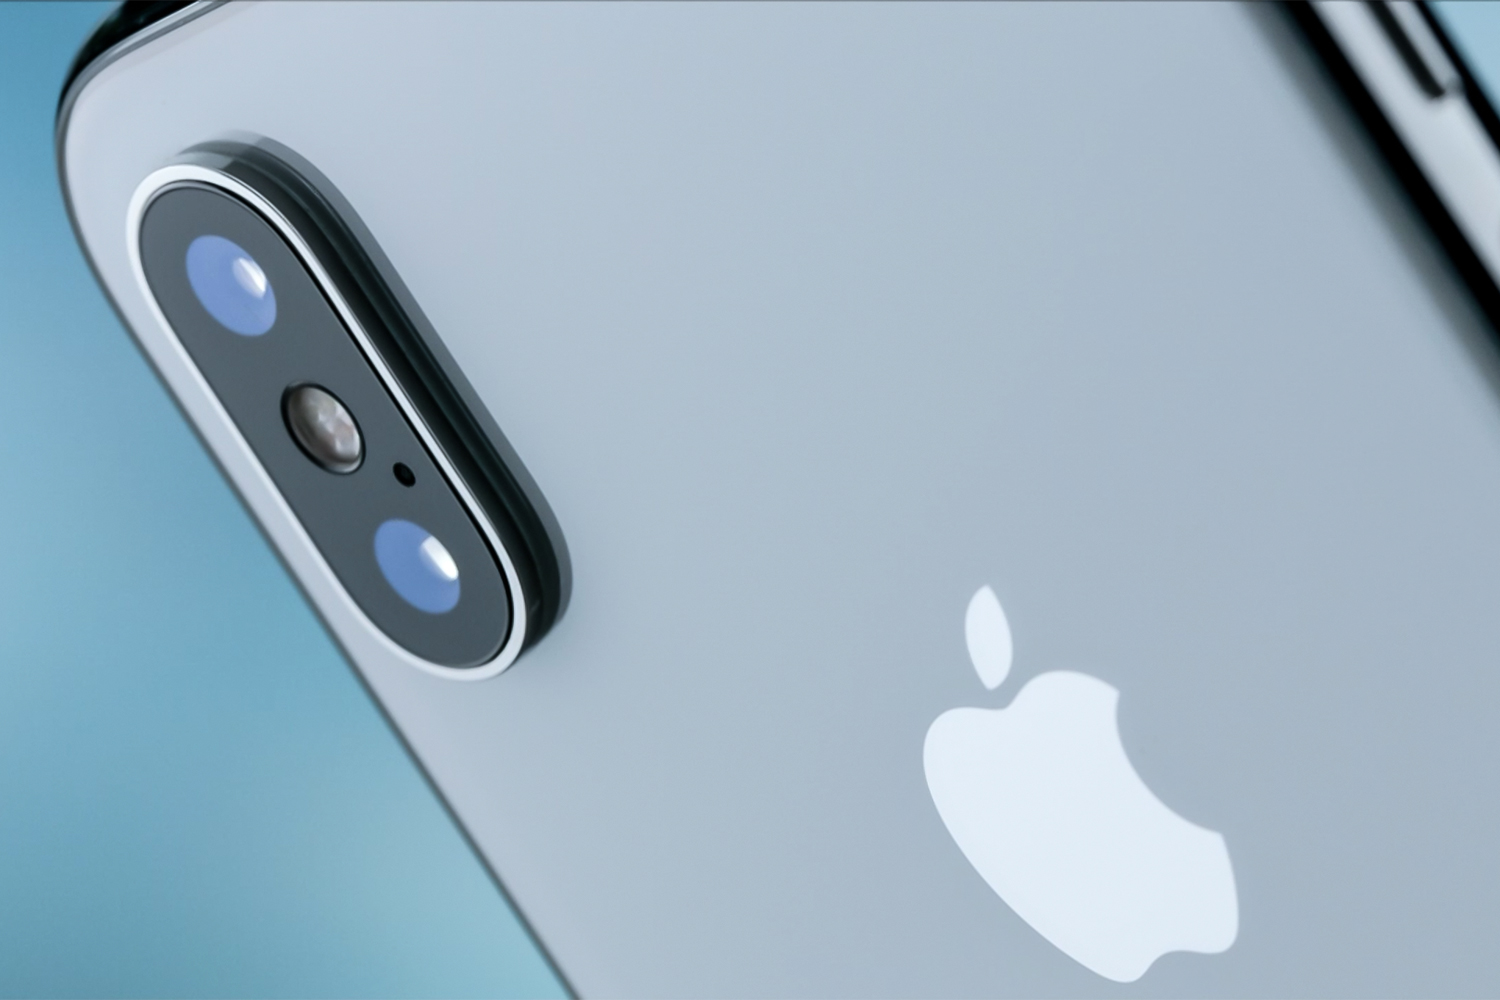 iPhone X details security performance A11 cpu